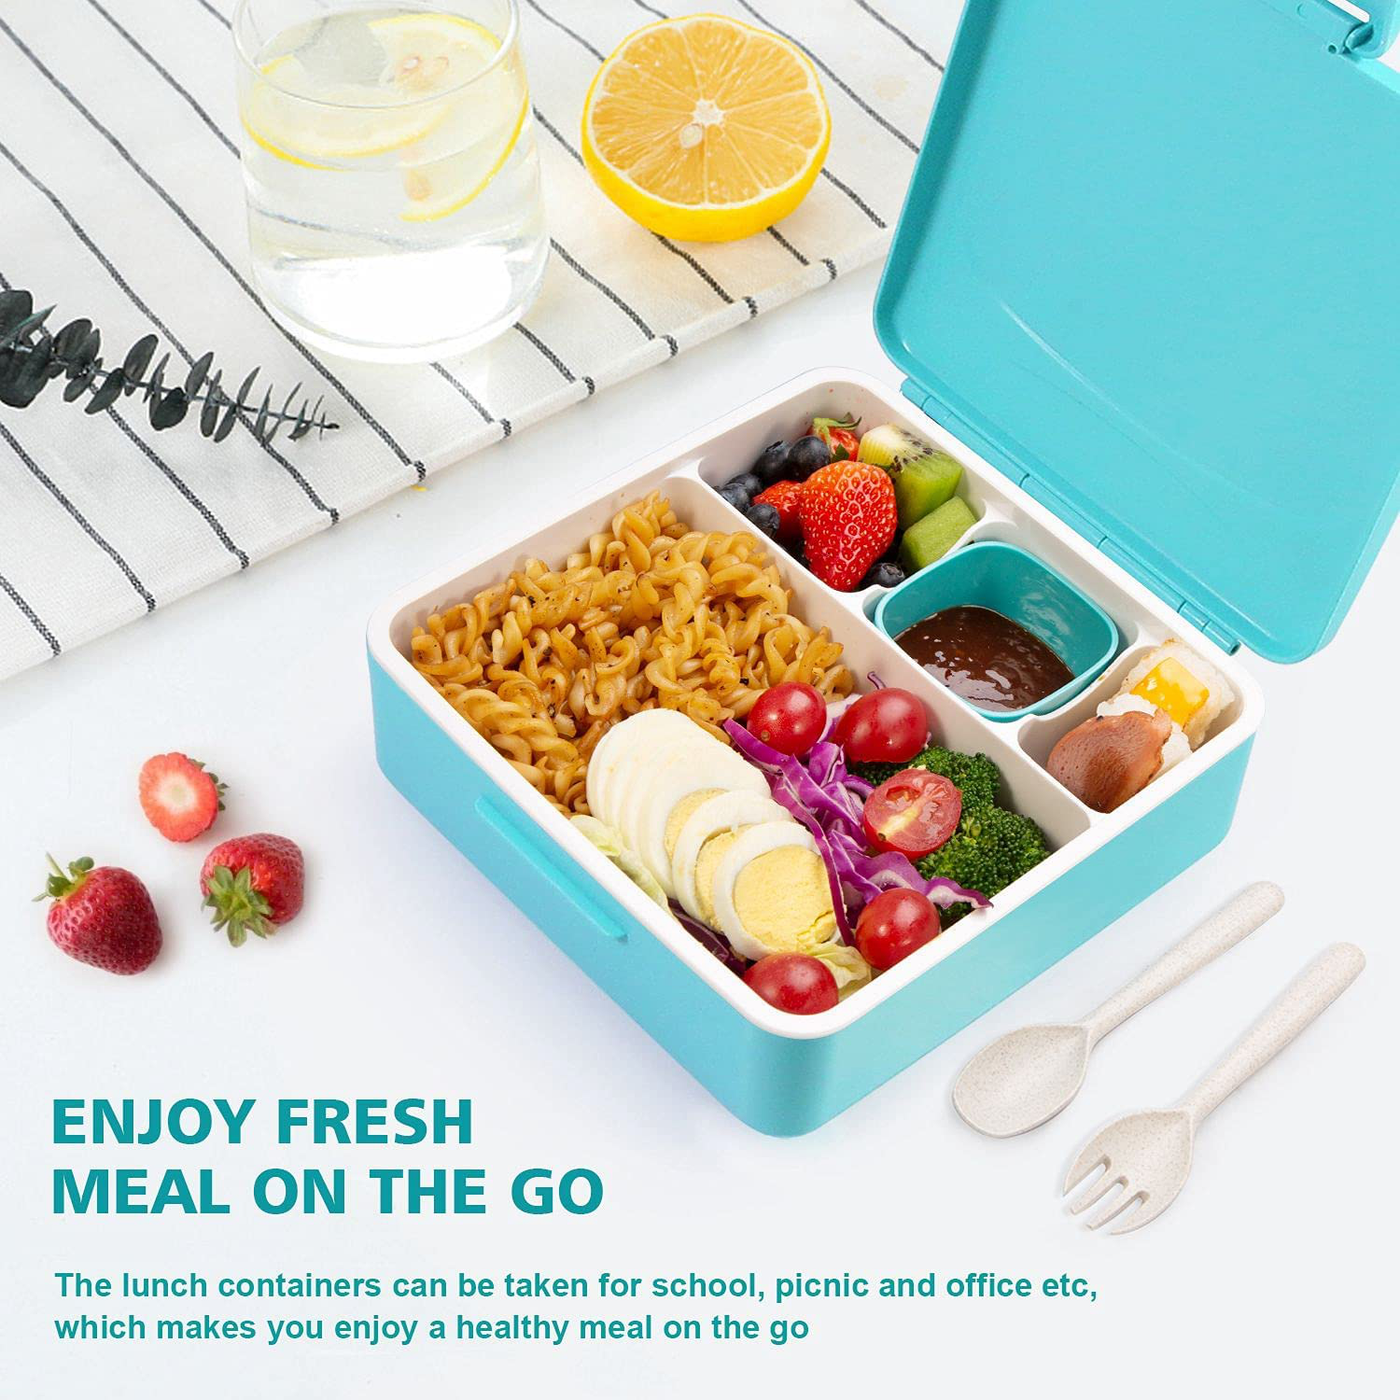 ECHTPower Bento Box, 1.3L Lunch Box with Handle Outer Box for Kids Children, Leak-Proof Lunch Containers with 4 Compartments, Extra Sauce Cup, Cutlery,Food-Safe Materials,Microwave and Dishwasher Safe